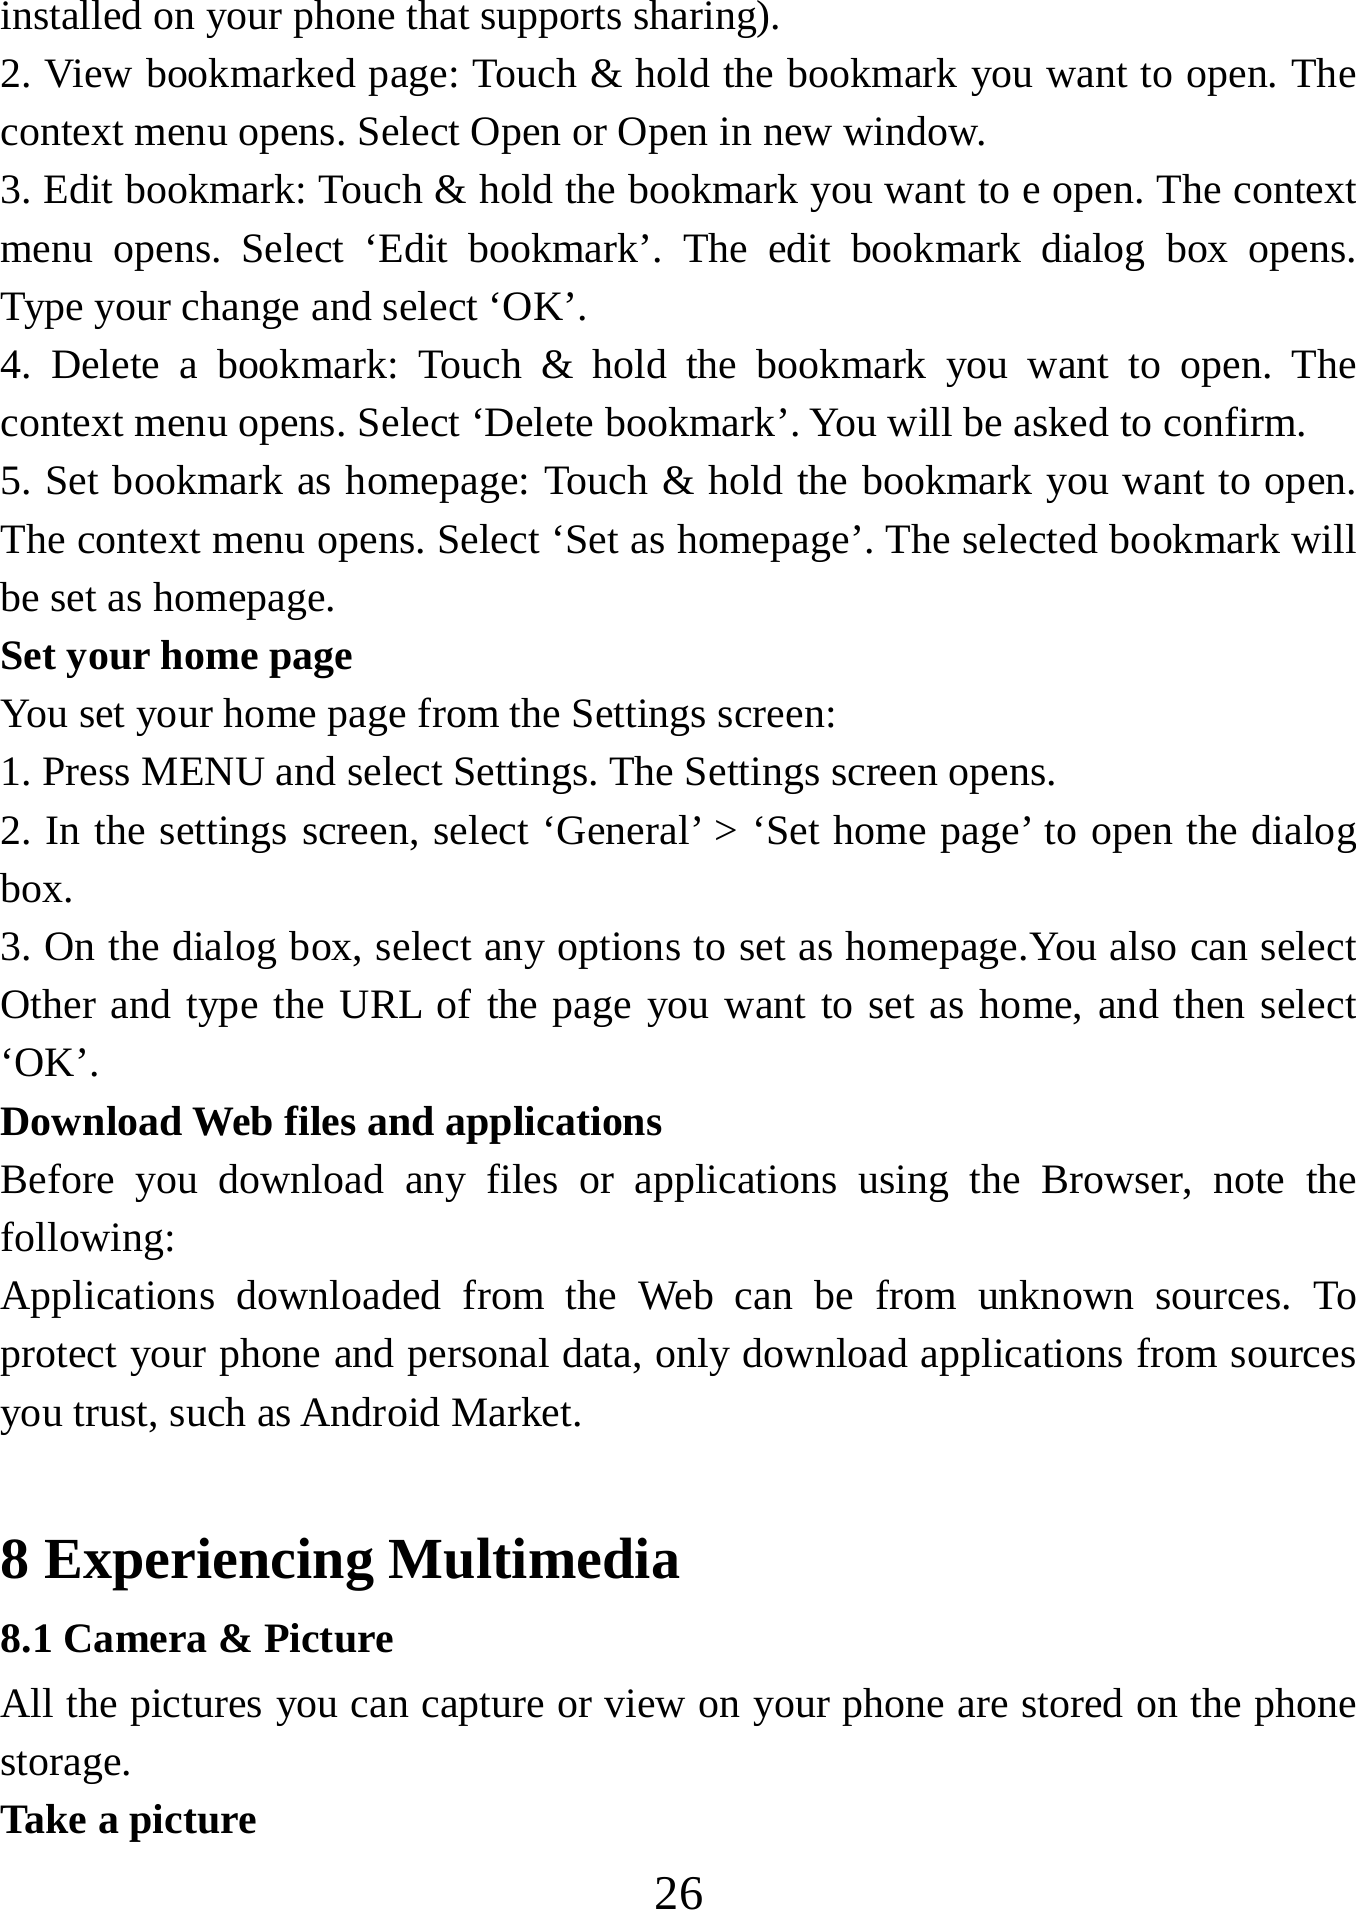   26installed on your phone that supports sharing).   2. View bookmarked page: Touch &amp; hold the bookmark you want to open. The context menu opens. Select Open or Open in new window. 3. Edit bookmark: Touch &amp; hold the bookmark you want to e open. The context menu opens. Select ‘Edit bookmark’. The edit bookmark dialog box opens. Type your change and select ‘OK’.   4. Delete a bookmark: Touch &amp; hold the bookmark you want to open. The context menu opens. Select ‘Delete bookmark’. You will be asked to confirm. 5. Set bookmark as homepage: Touch &amp; hold the bookmark you want to open. The context menu opens. Select ‘Set as homepage’. The selected bookmark will be set as homepage. Set your home page   You set your home page from the Settings screen:   1. Press MENU and select Settings. The Settings screen opens.   2. In the settings screen, select ‘General’ &gt; ‘Set home page’ to open the dialog box.  3. On the dialog box, select any options to set as homepage.You also can select Other and type the URL of the page you want to set as home, and then select ‘OK’. Download Web files and applications   Before you download any files or applications using the Browser, note the following:  Applications downloaded from the Web can be from unknown sources. To protect your phone and personal data, only download applications from sources you trust, such as Android Market.   8 Experiencing Multimedia 8.1 Camera &amp; Picture All the pictures you can capture or view on your phone are stored on the phone storage. Take a picture   